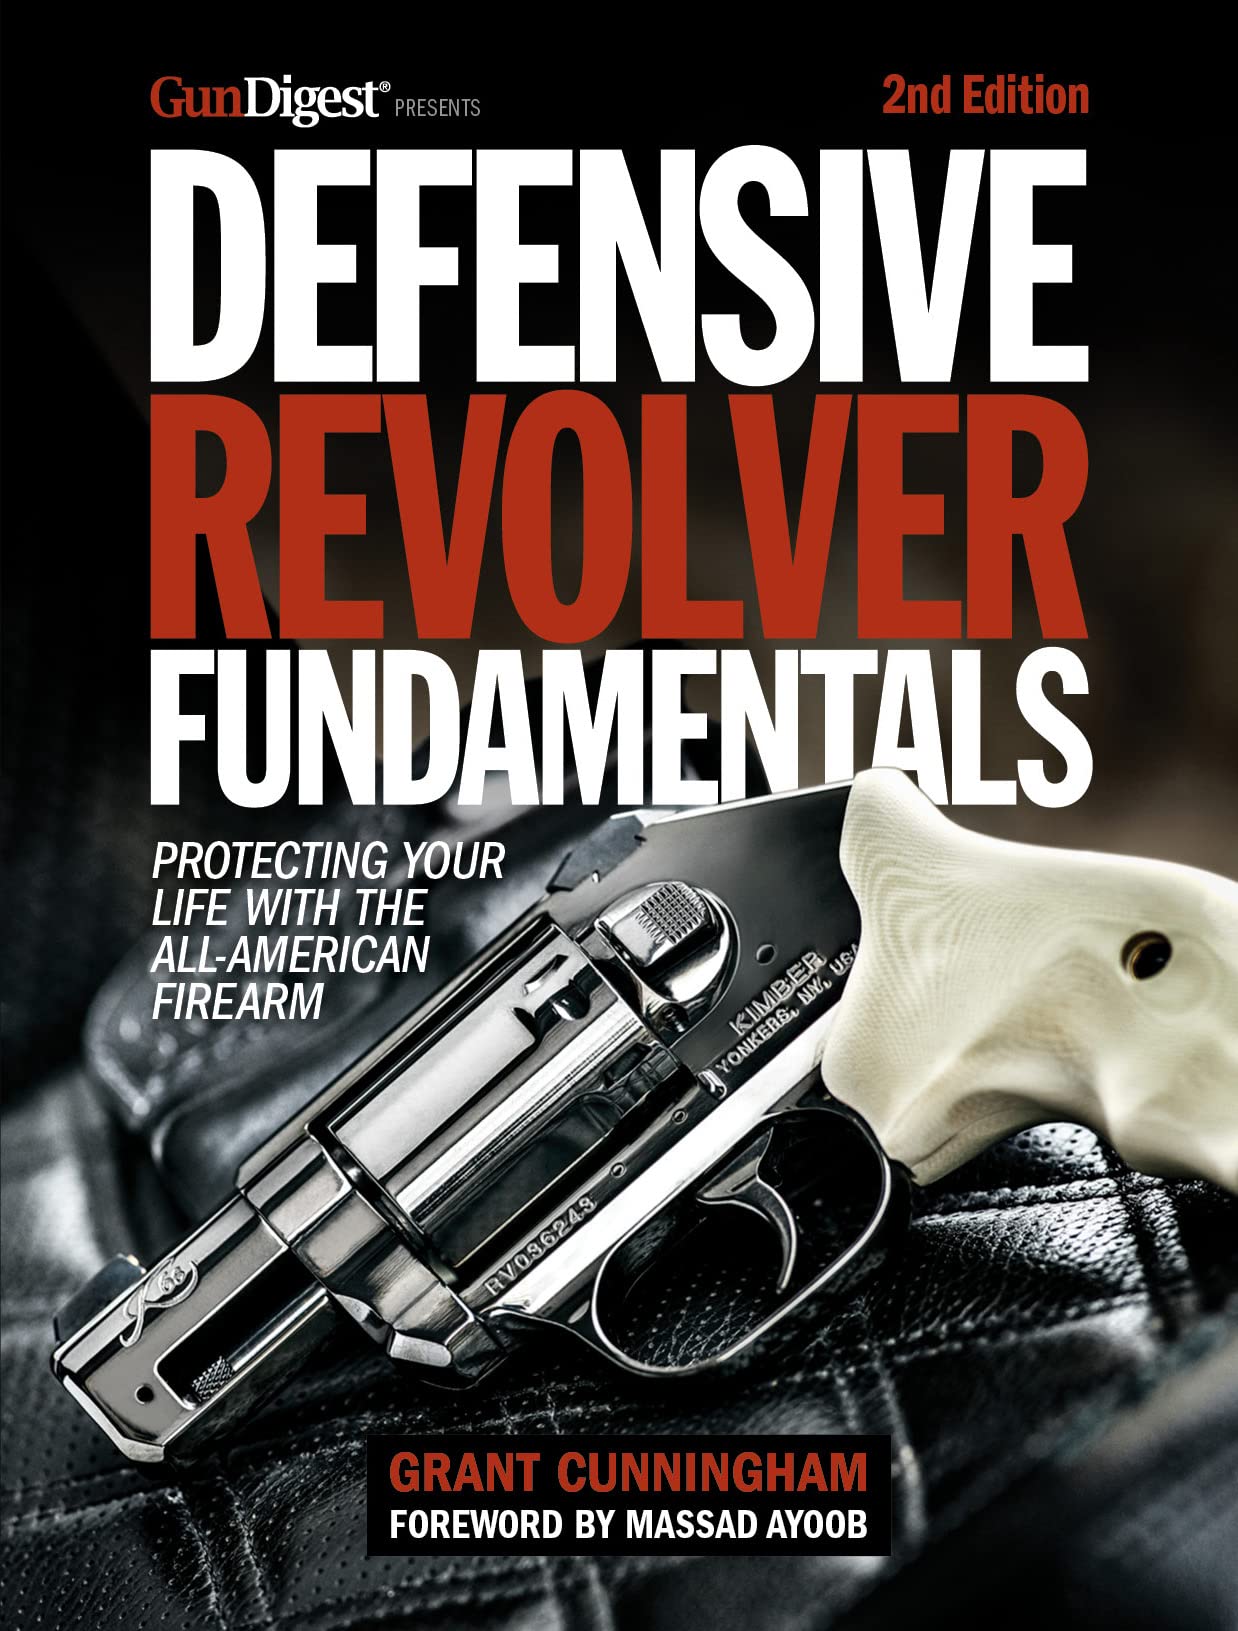 Defensive Revolver Fundamentals, 2nd Edition: Protecting Your Life with the All-American Firearm ( Defensive Revolver Fundamentals ) (2ND ed.) - SureShot Books Publishing LLC